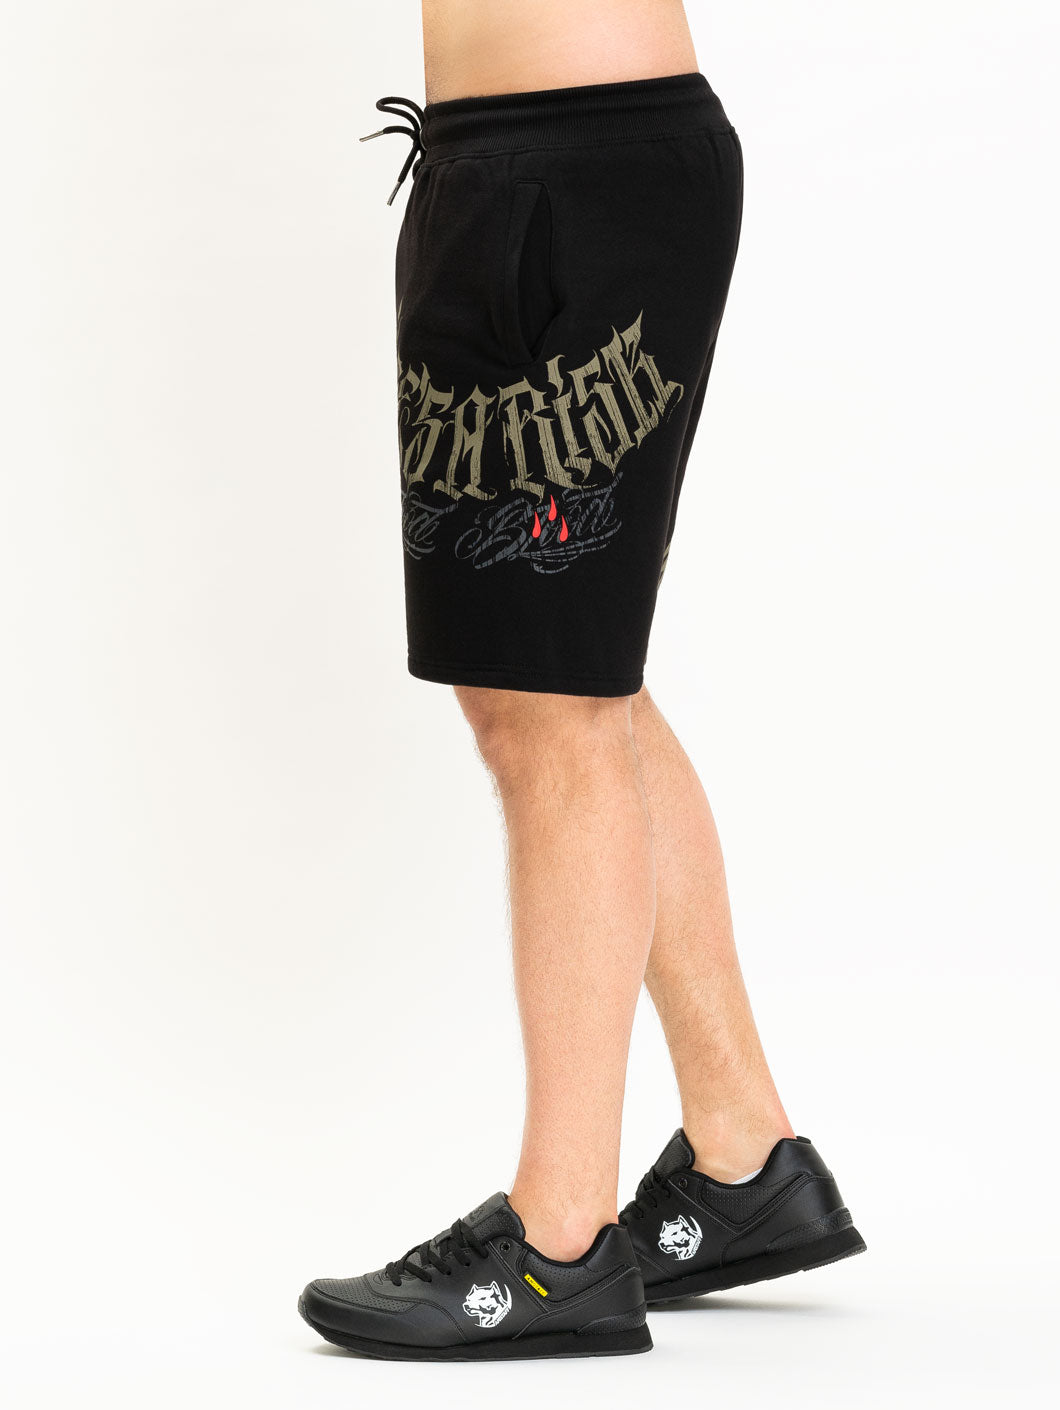 Blood In Blood Out Miembros Sweatshorts - 5